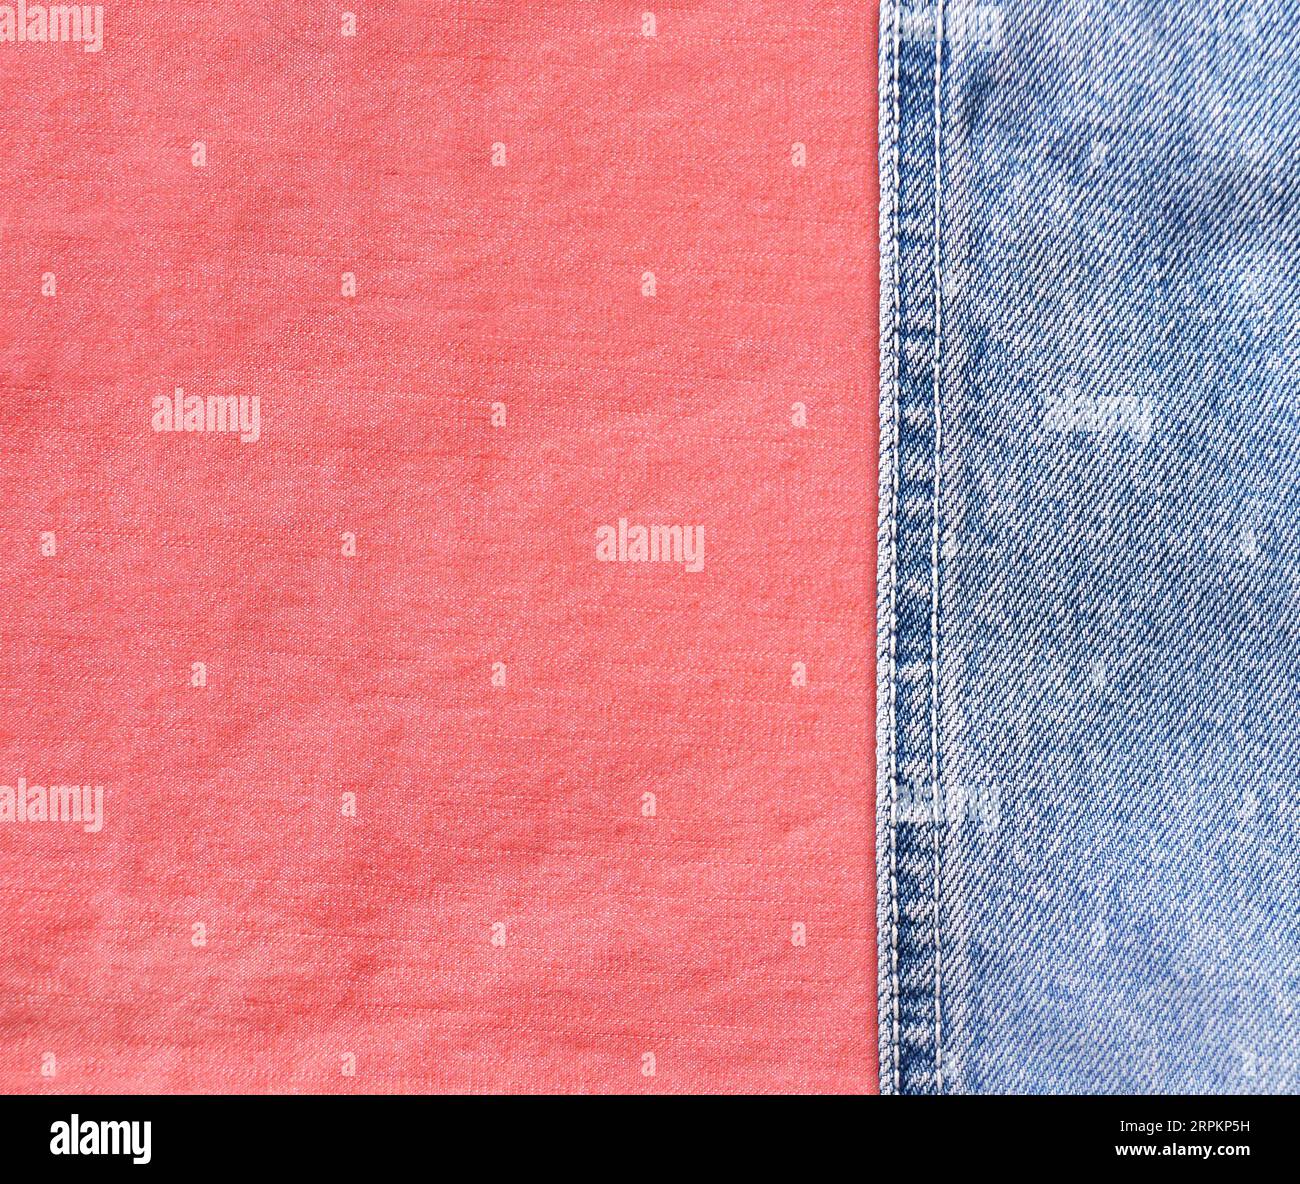 Blue denim borders with a seam and coral cotton texture. Light blue and pink color denim jeans fabric. Copy space for text Stock Photo